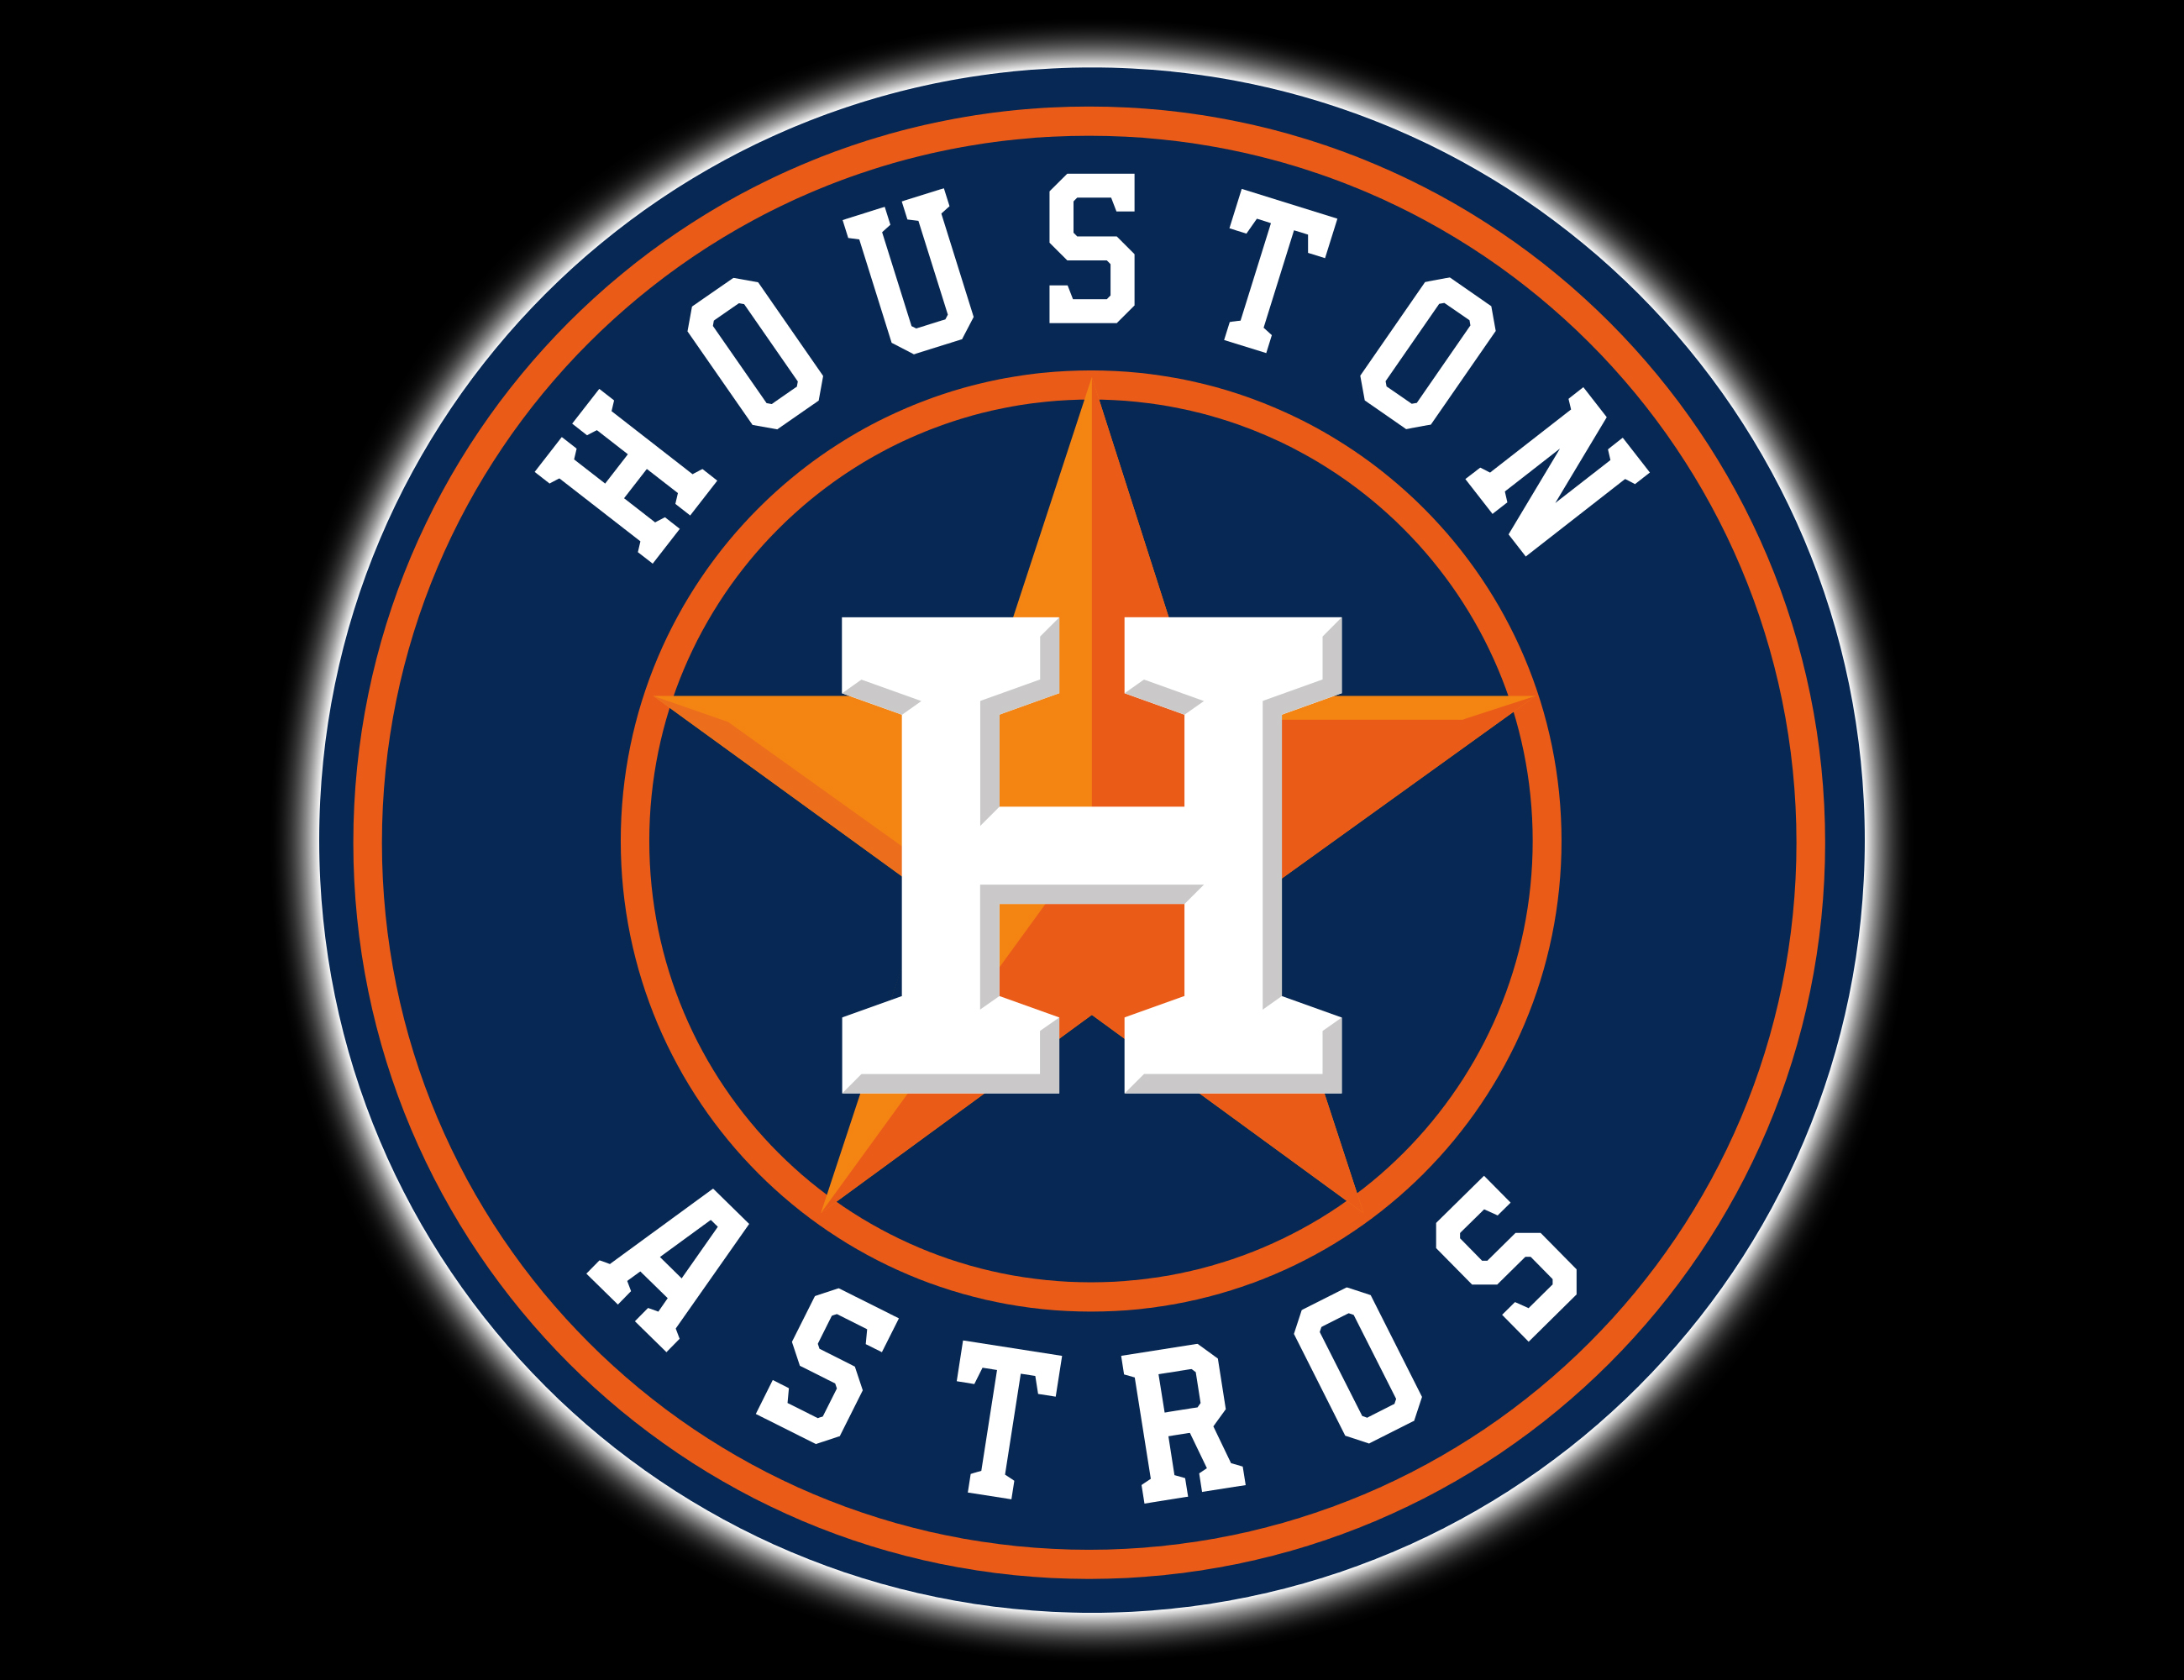 The Astros' star logo is too abstract! Houston has an iconic